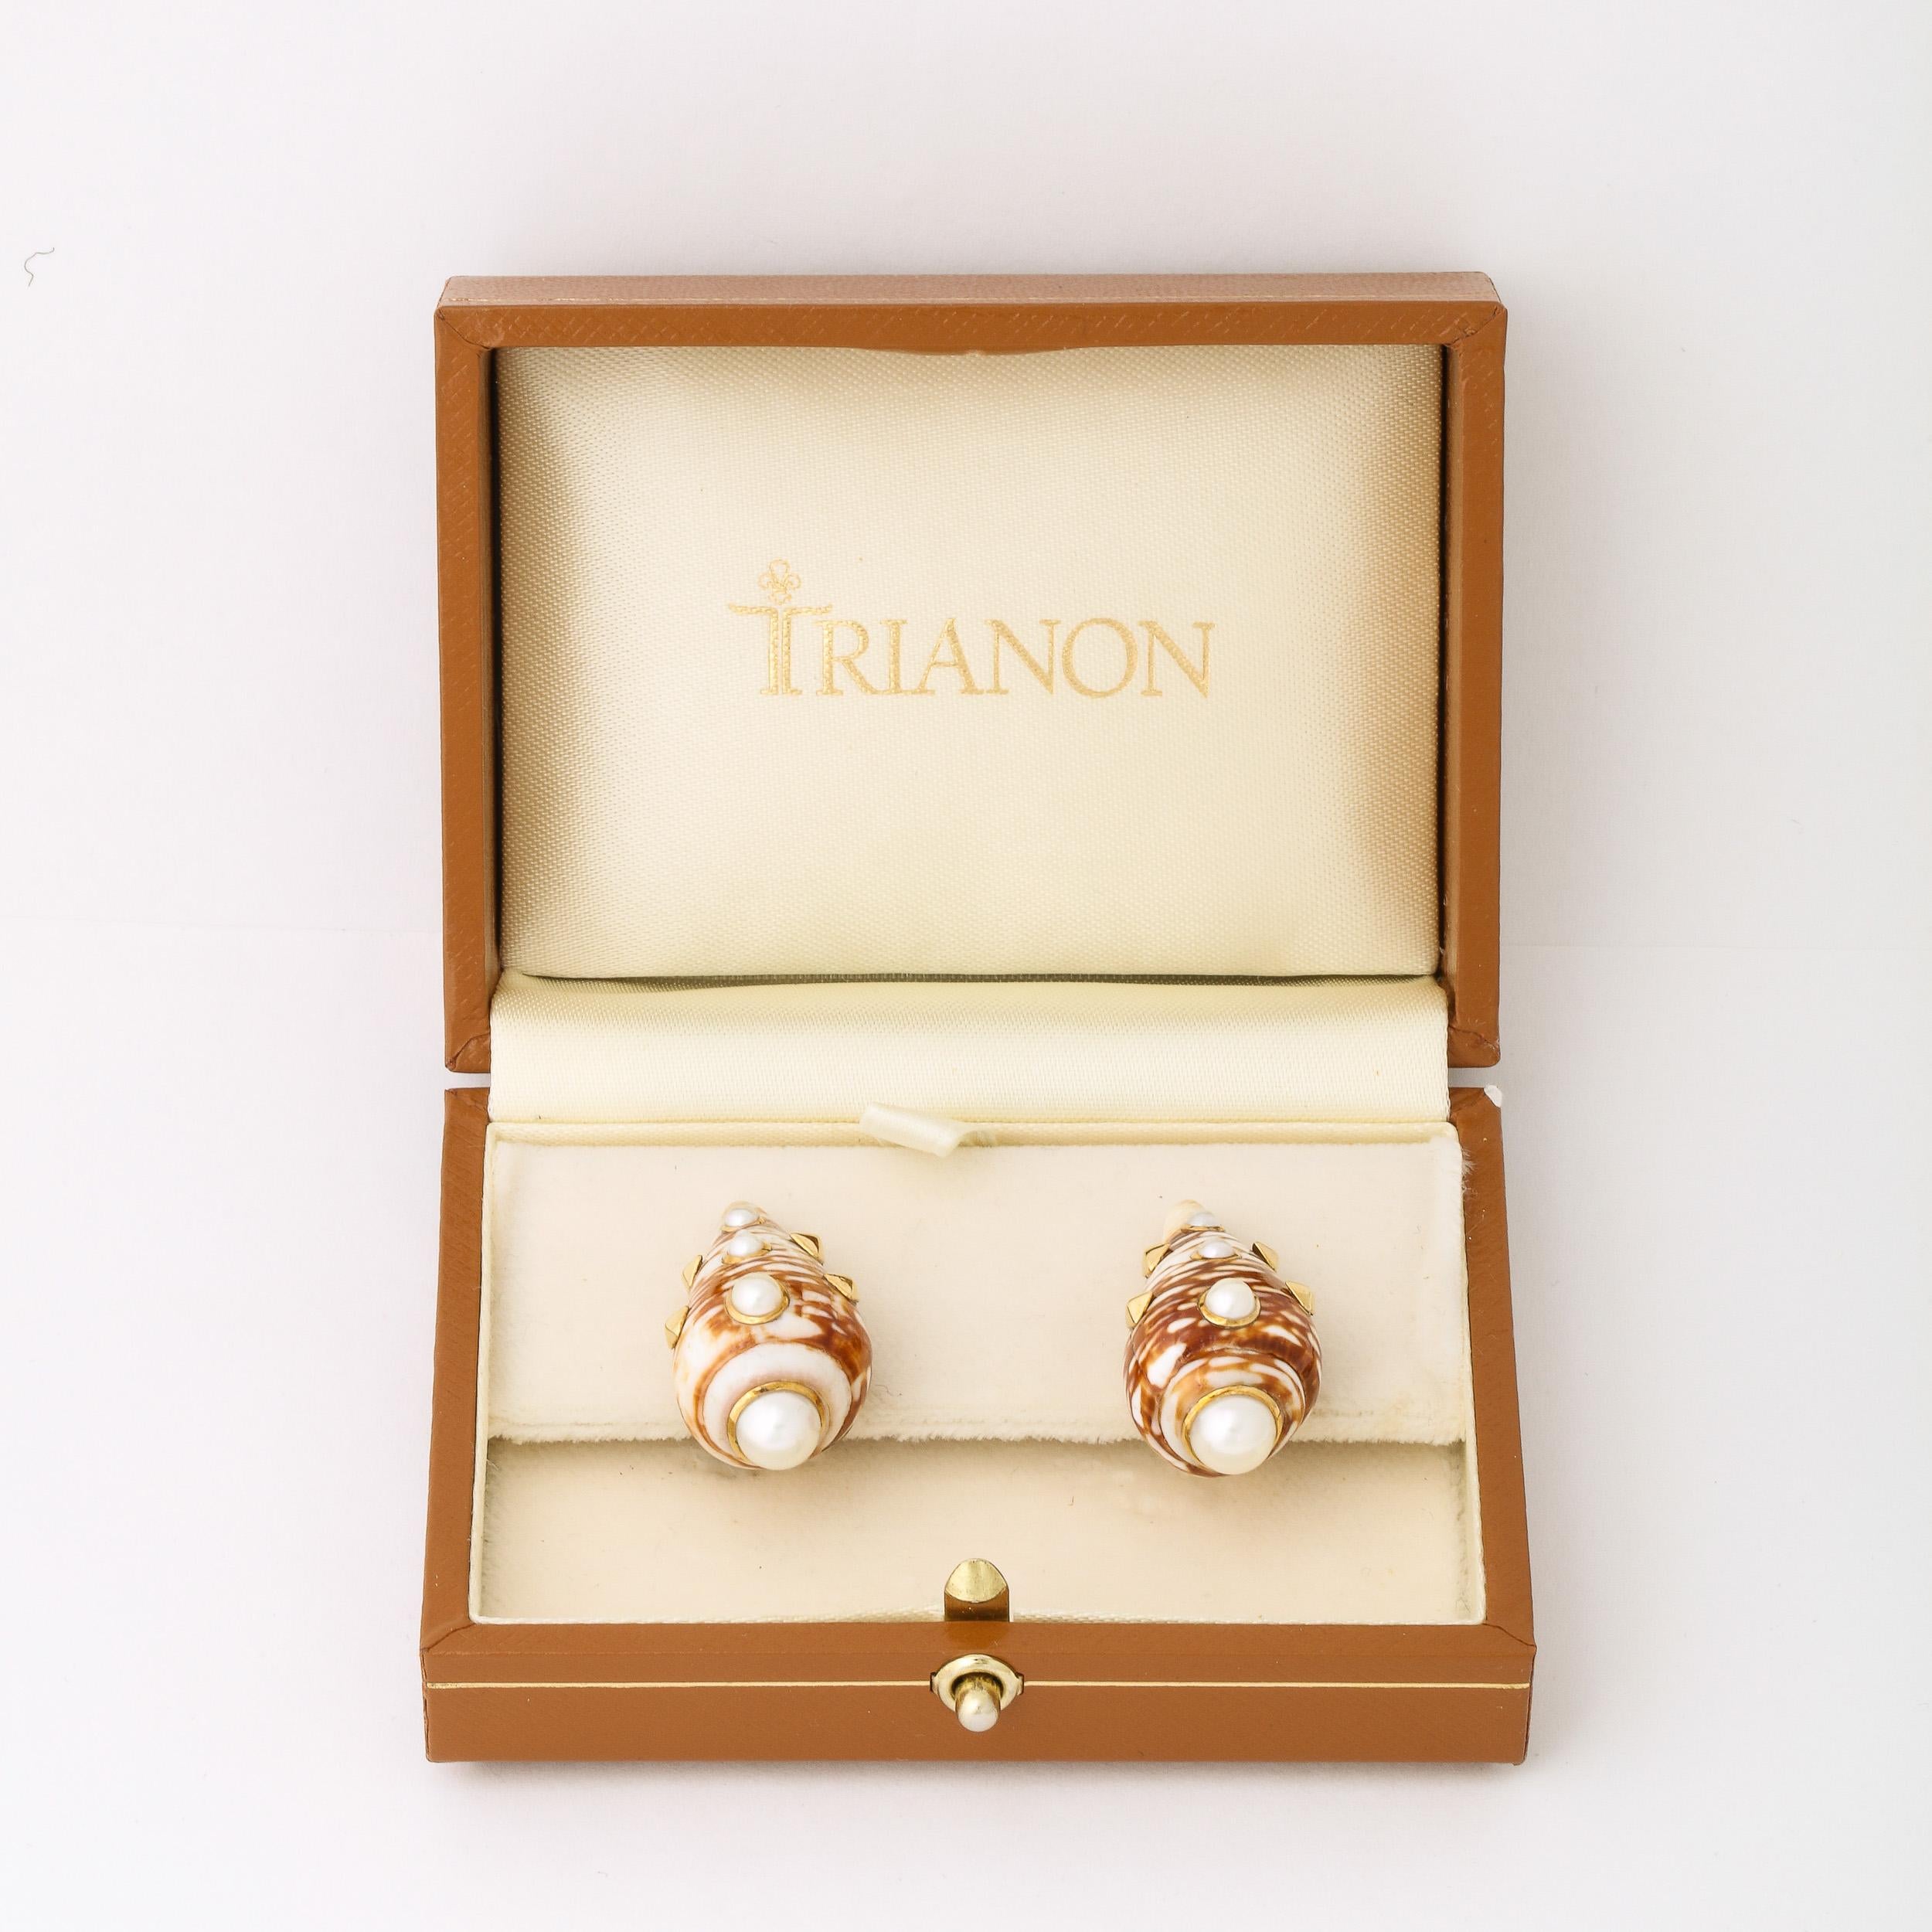 These beautiful earrings in Iron Red & Beige Shells, set in 18k Gold With Inlaid Pearls by Trianon. They feature an elegant blend of Metal and Organic materials, gorgeously set in 18k Gold that circumscribes the inlaid graduated pearl motif that